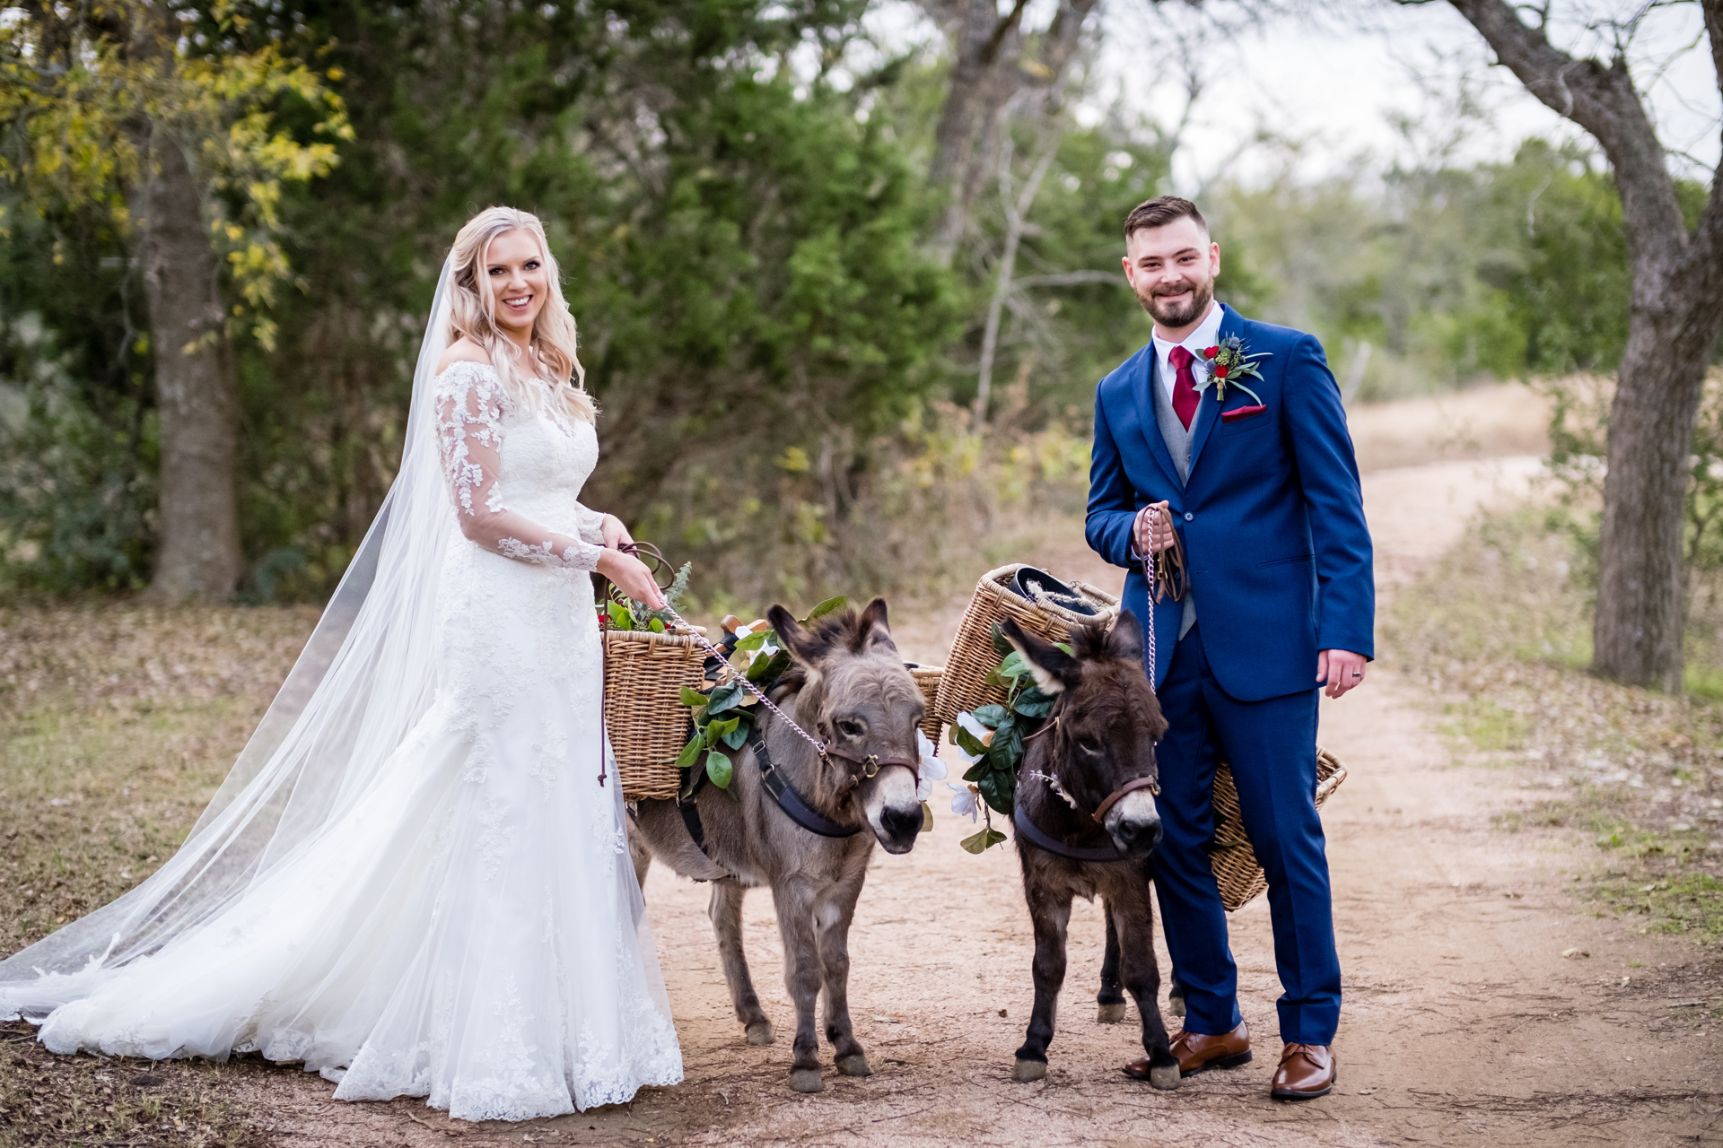 Bide and groom stop to pose for a photo as they walk two donkies on a dirt path at Pecan Springs Ranch wedding venue. 